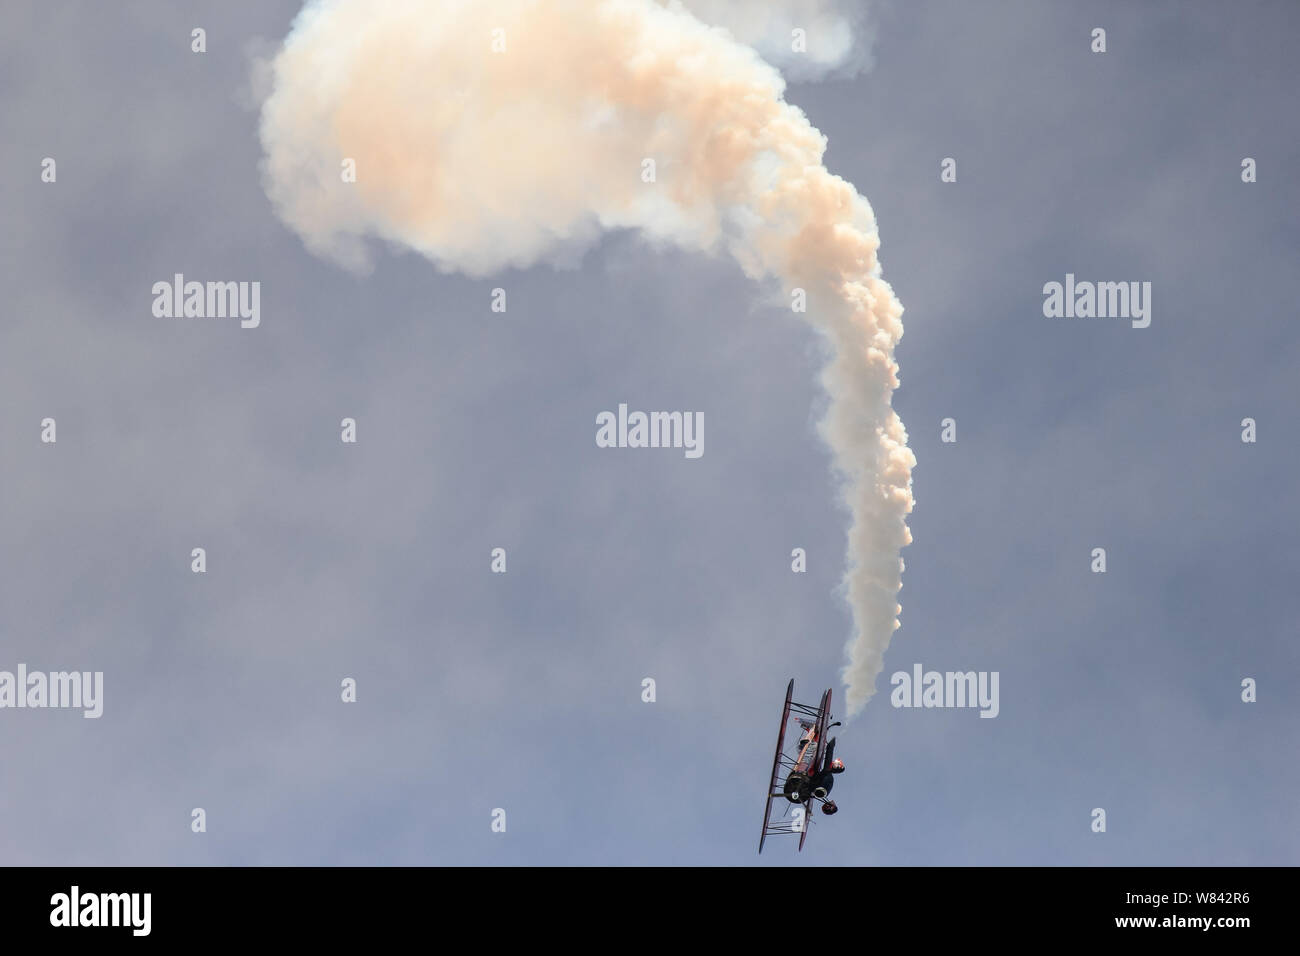 Sean D. Tucker - an aerobatic aviator who is sponsored by the Oracle,  performs acrobatic stunts in an airshow, Dayton Stock Photo